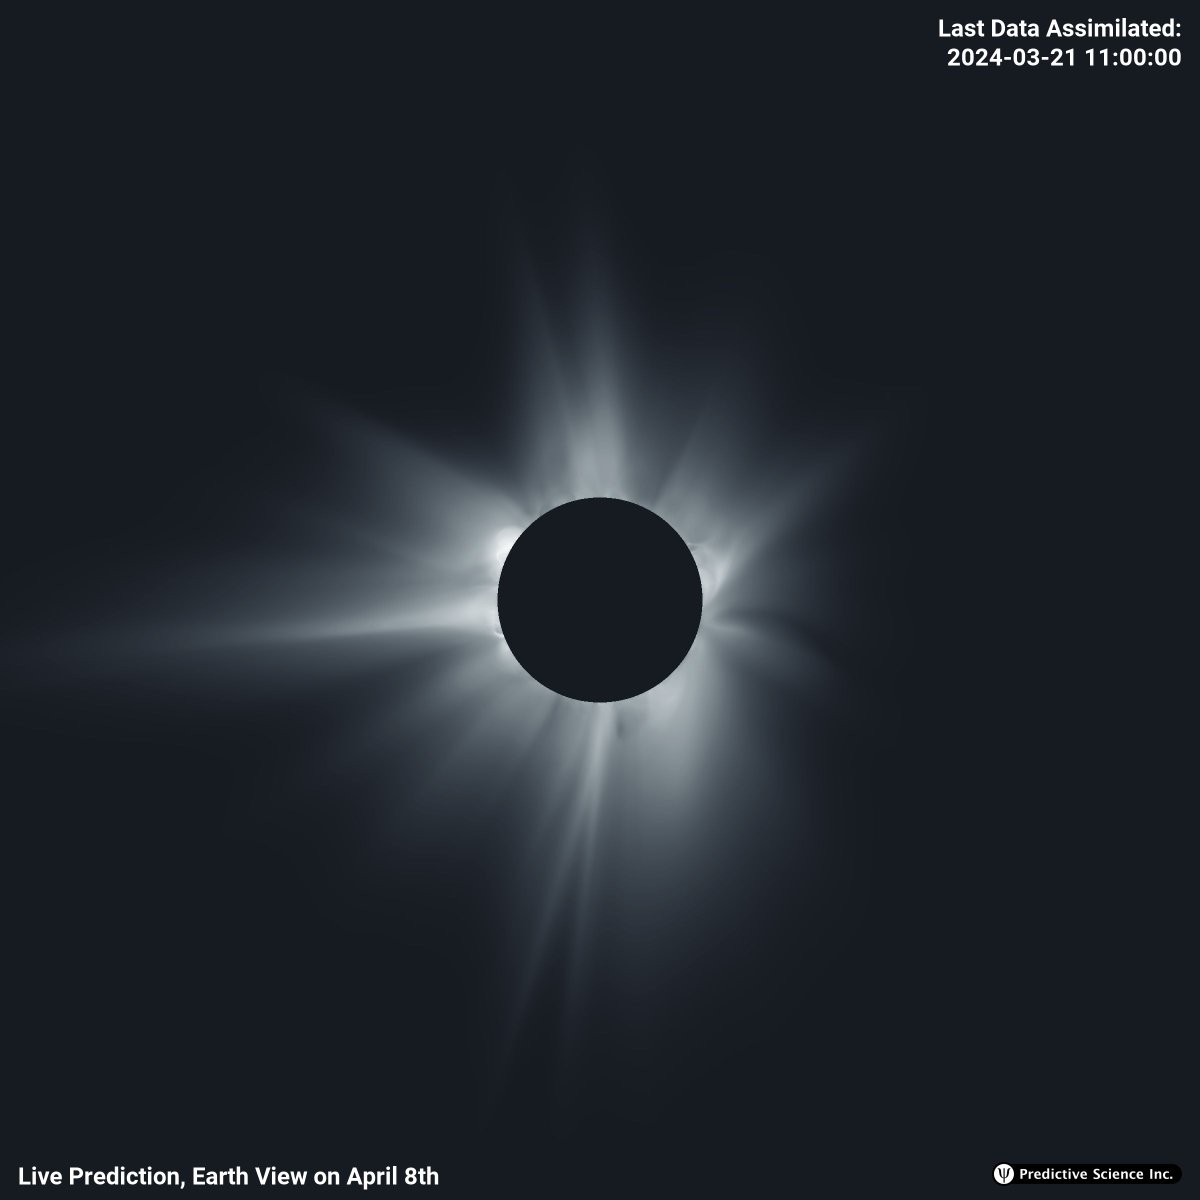 (Im)patiently waiting for the #TotalSolarEclipse of April 8, 2024? Now you can get a sneak peek of what we expect the elusive corona to look like in the path of totality. Check out our constantly-evolving, real-time prediction at predsci.com/eclipse2024